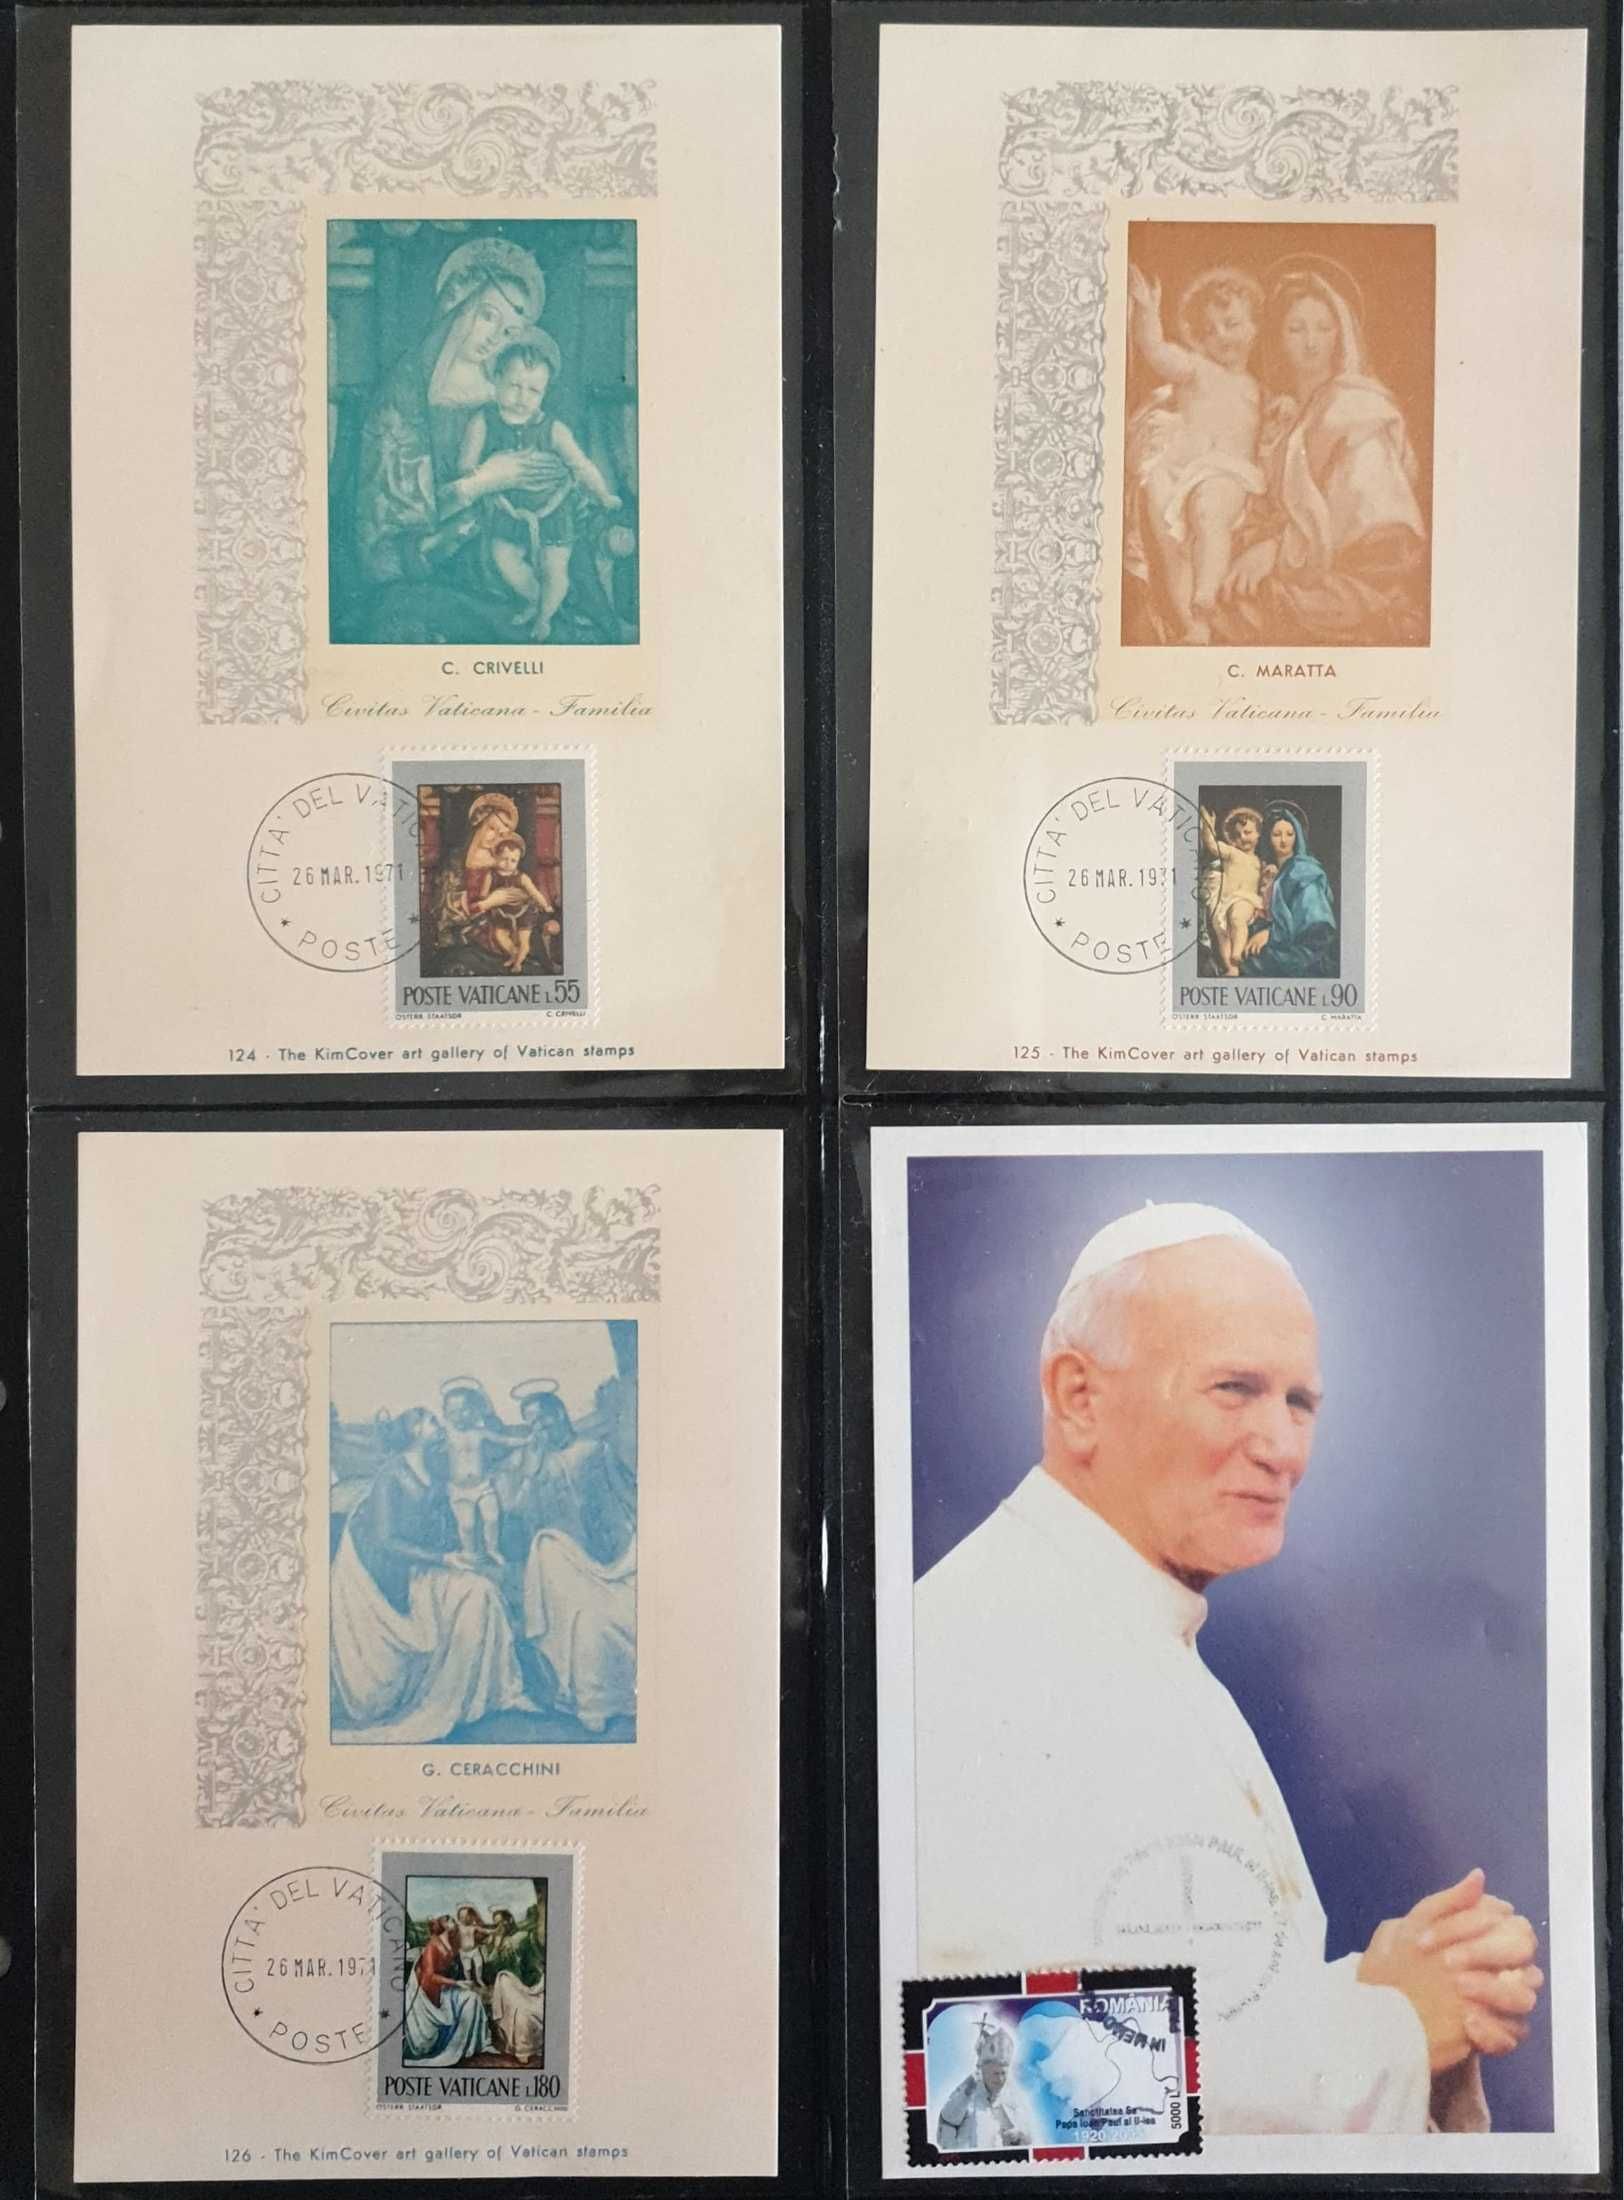 35 carti postale cu timbre The KimCover art gallery of Vatican stamps